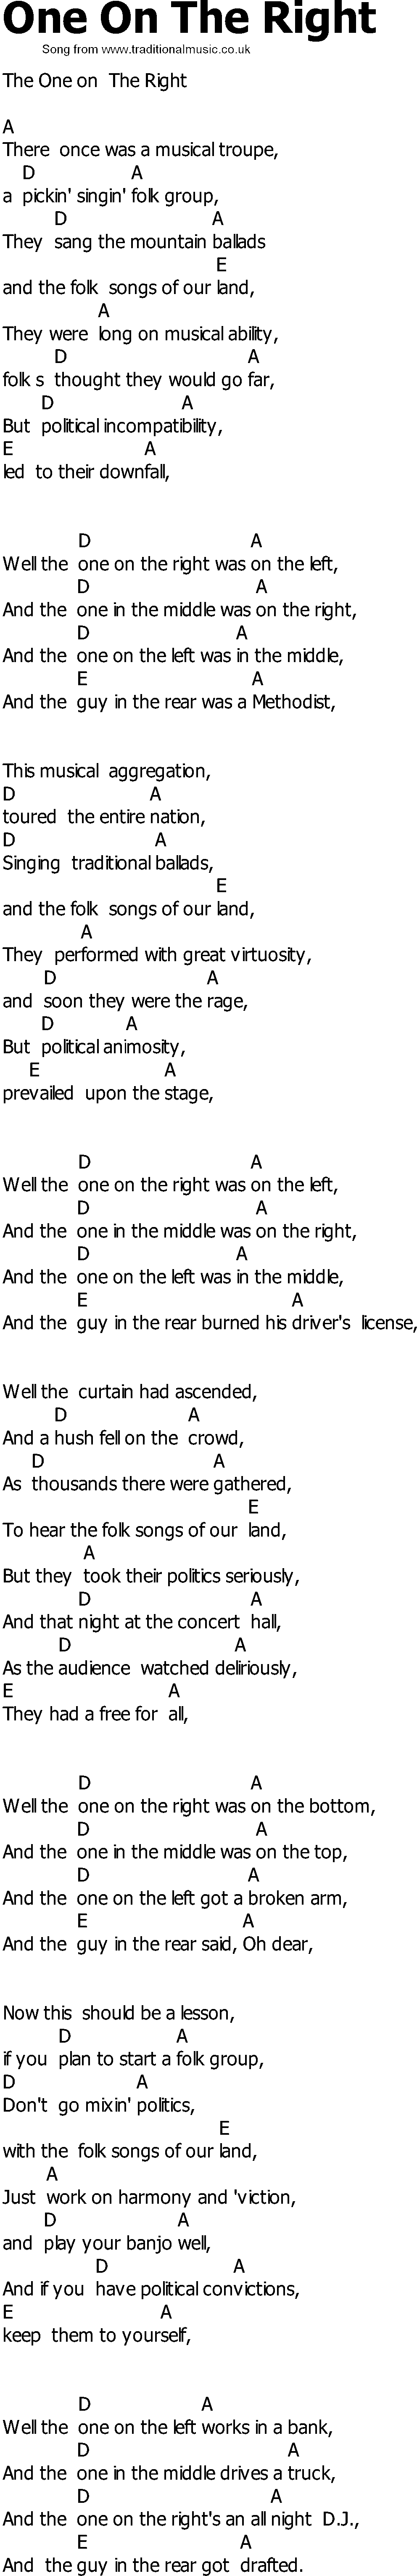 Old Country song lyrics with chords - One On The Right